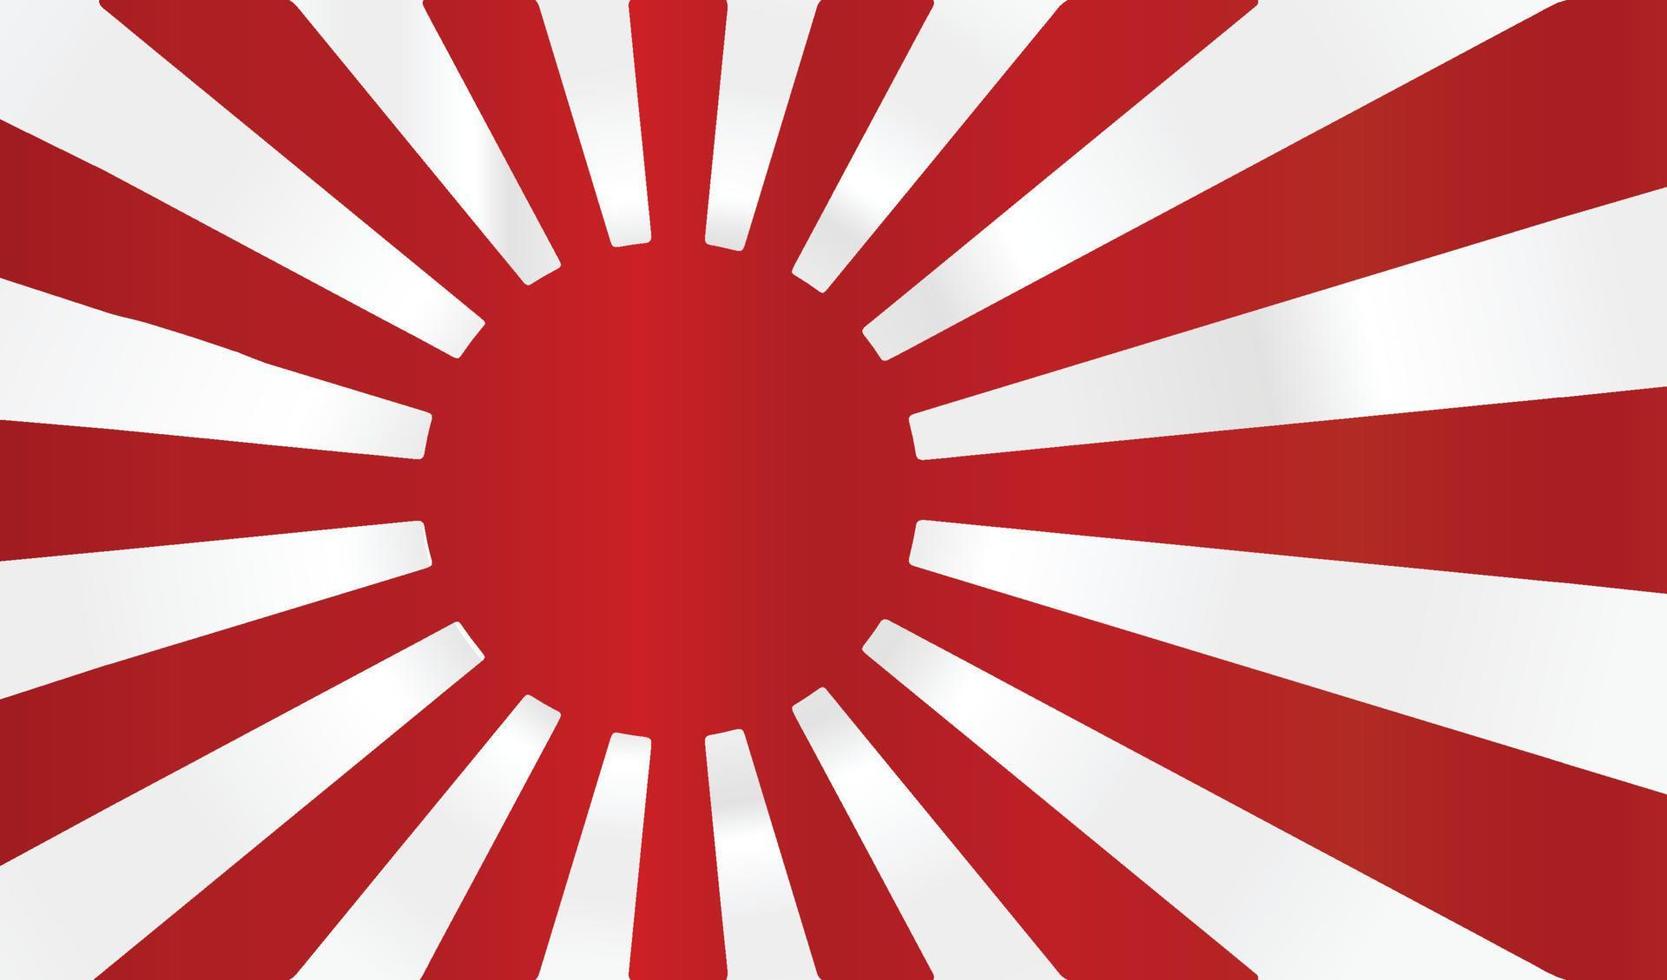 Rising sun country flag of japanese imperial naval ready for your history design vector